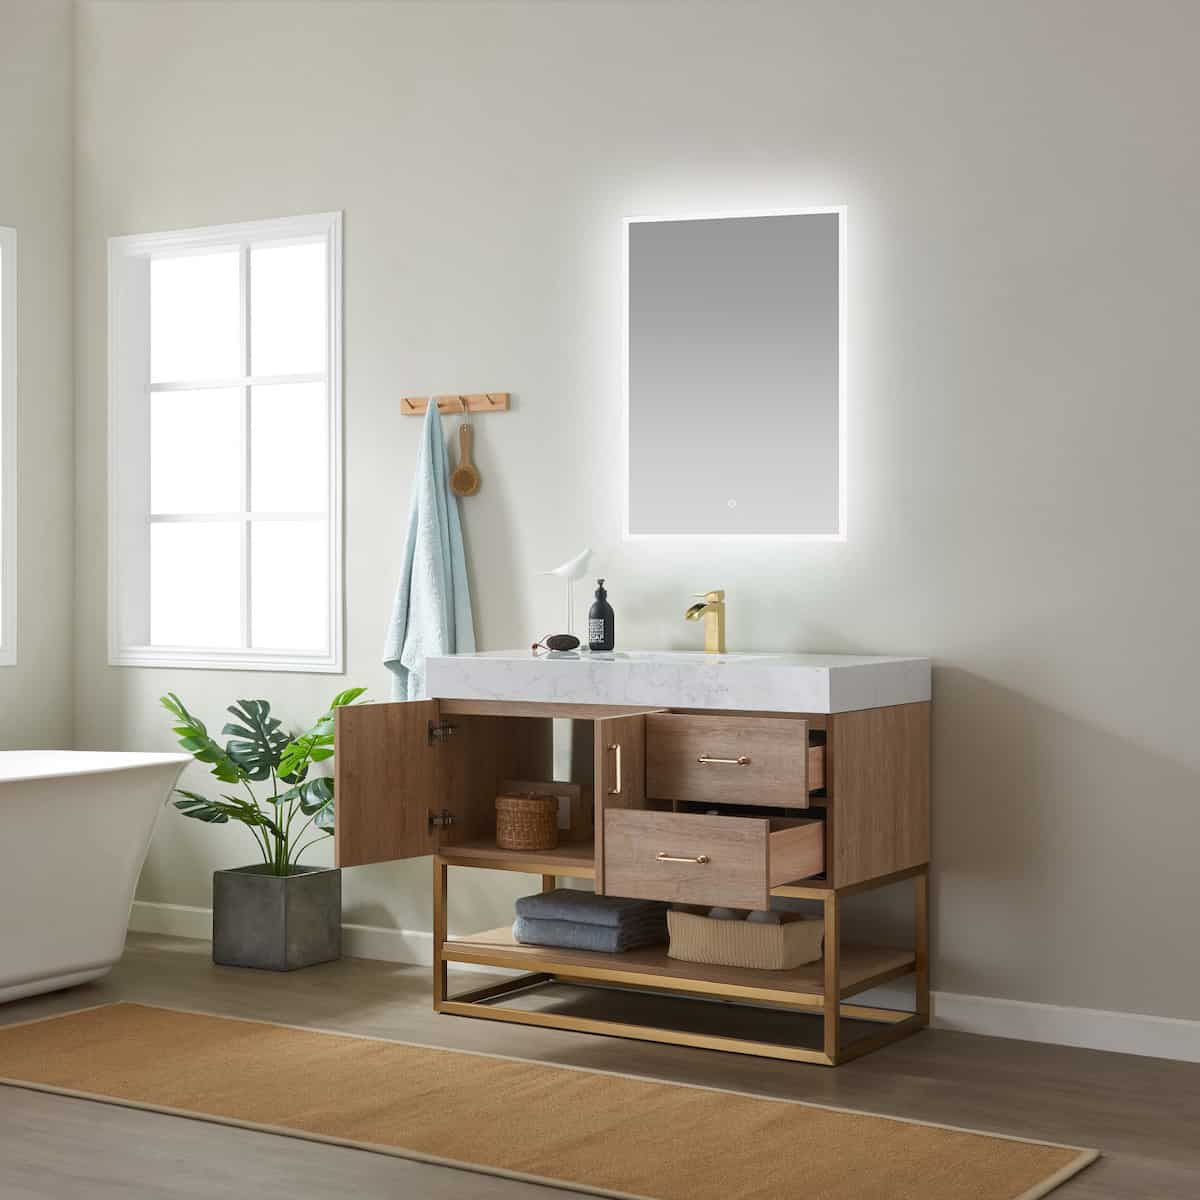 Vinnova Alistair 42 Inch Freestanding Single Vanity in North American Oak and Brushed Gold Frame with White Grain Stone Countertop With Mirror Inside 789042-NO-GW